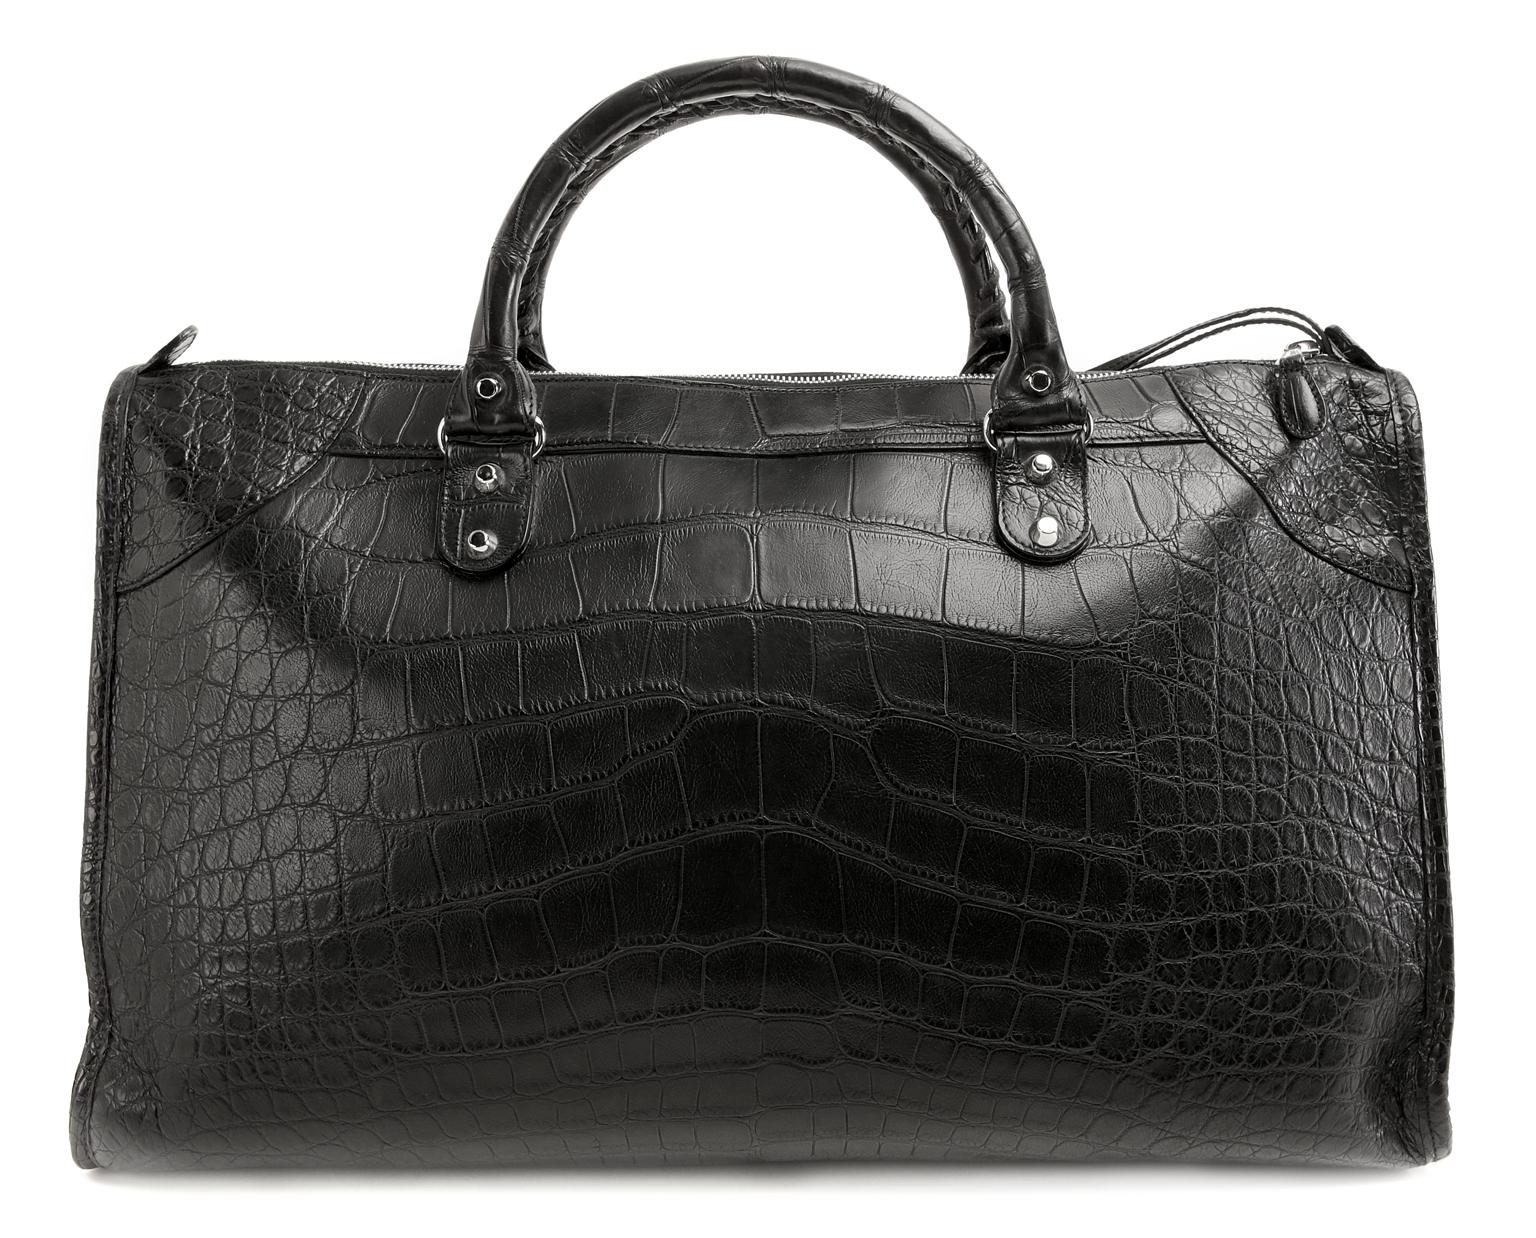 Balenciaga Black Crocodile Weekender- PRISTINE: appears never carried The iconic moto inspired design elements are all present in this incredible unisex travel bag. Matte black crocodile skin large carryall is accented with silver tone hardware.